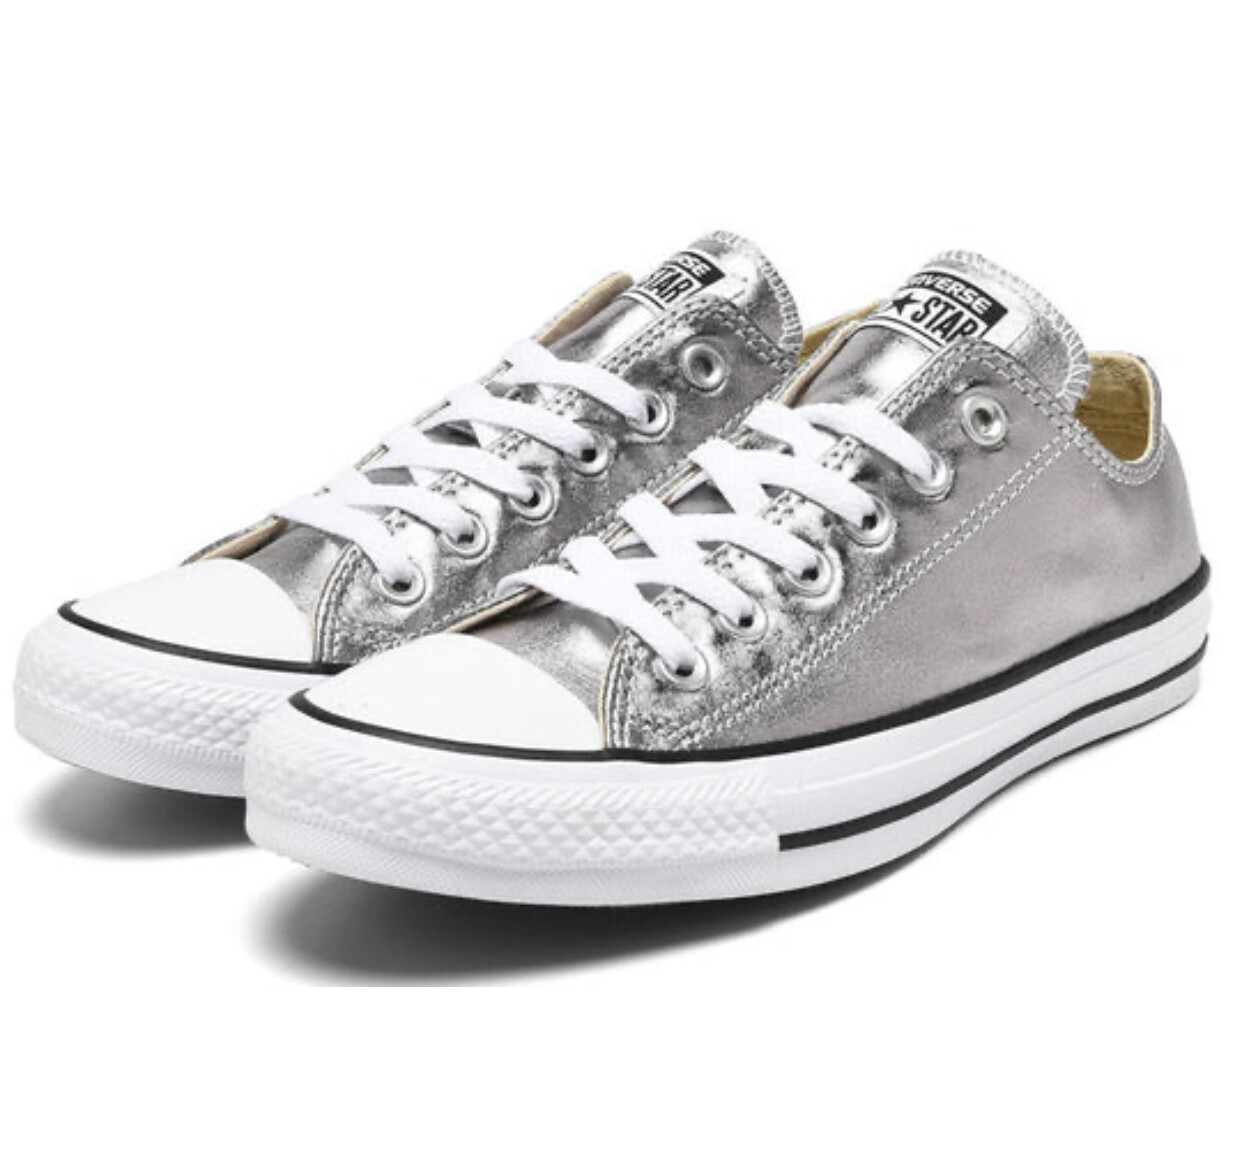 CONVERSE Unisex Chuck Taylor All Star Sneakers in Silver Mens 9, Womens 10